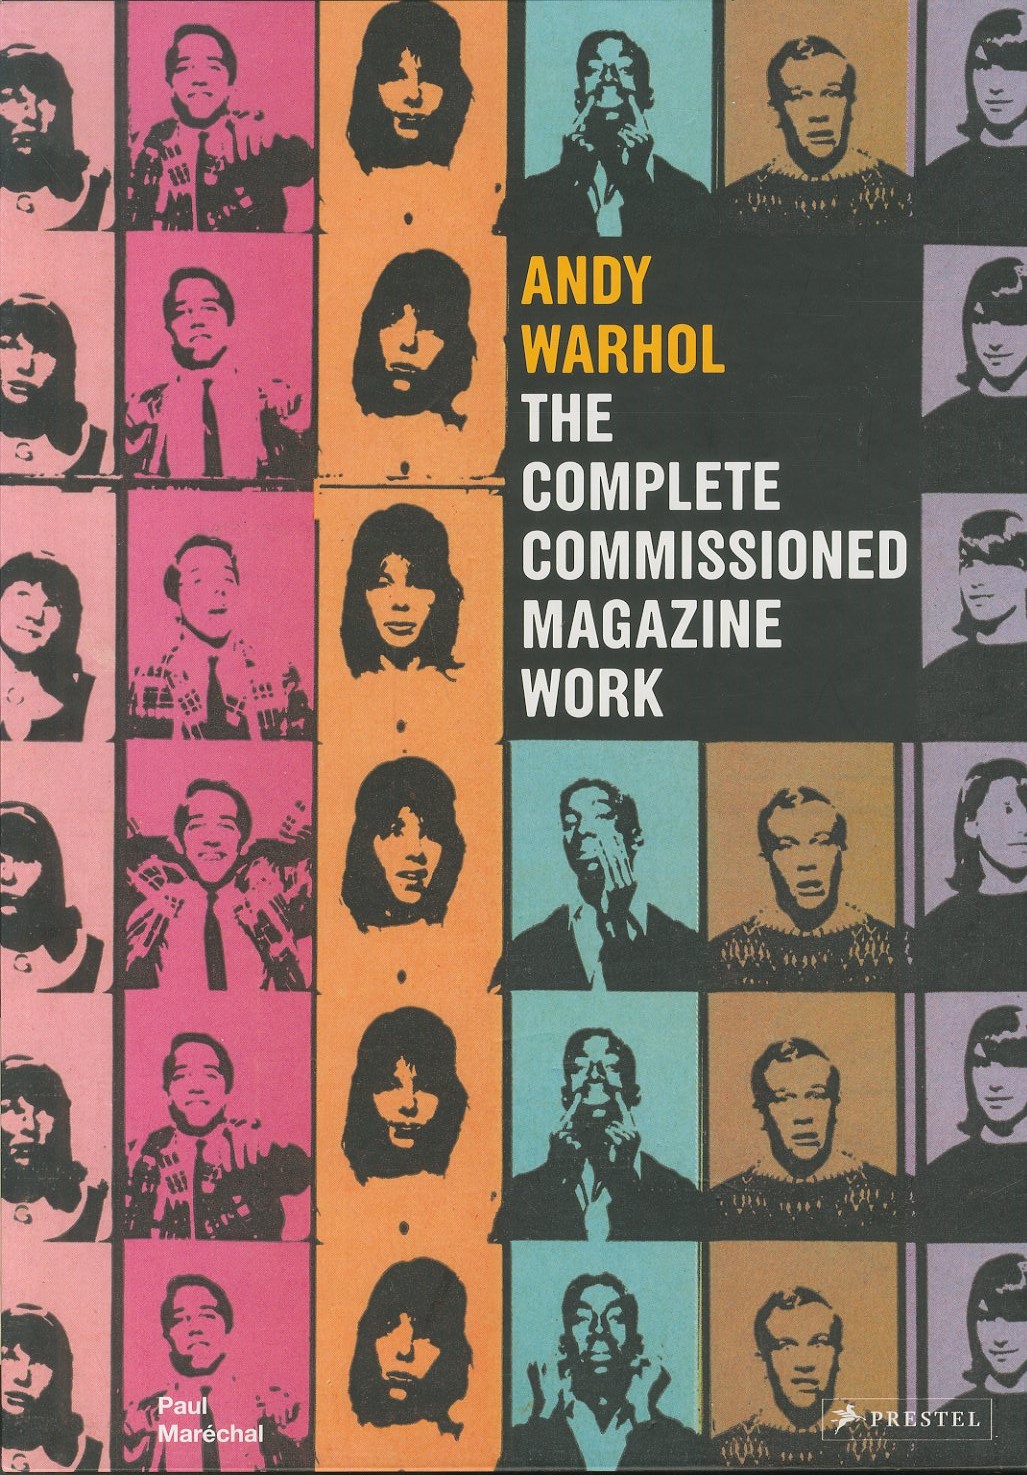 「THE COMPLETE COMMISSIONED MAGAZINE WORK / Andy Warhol」メイン画像